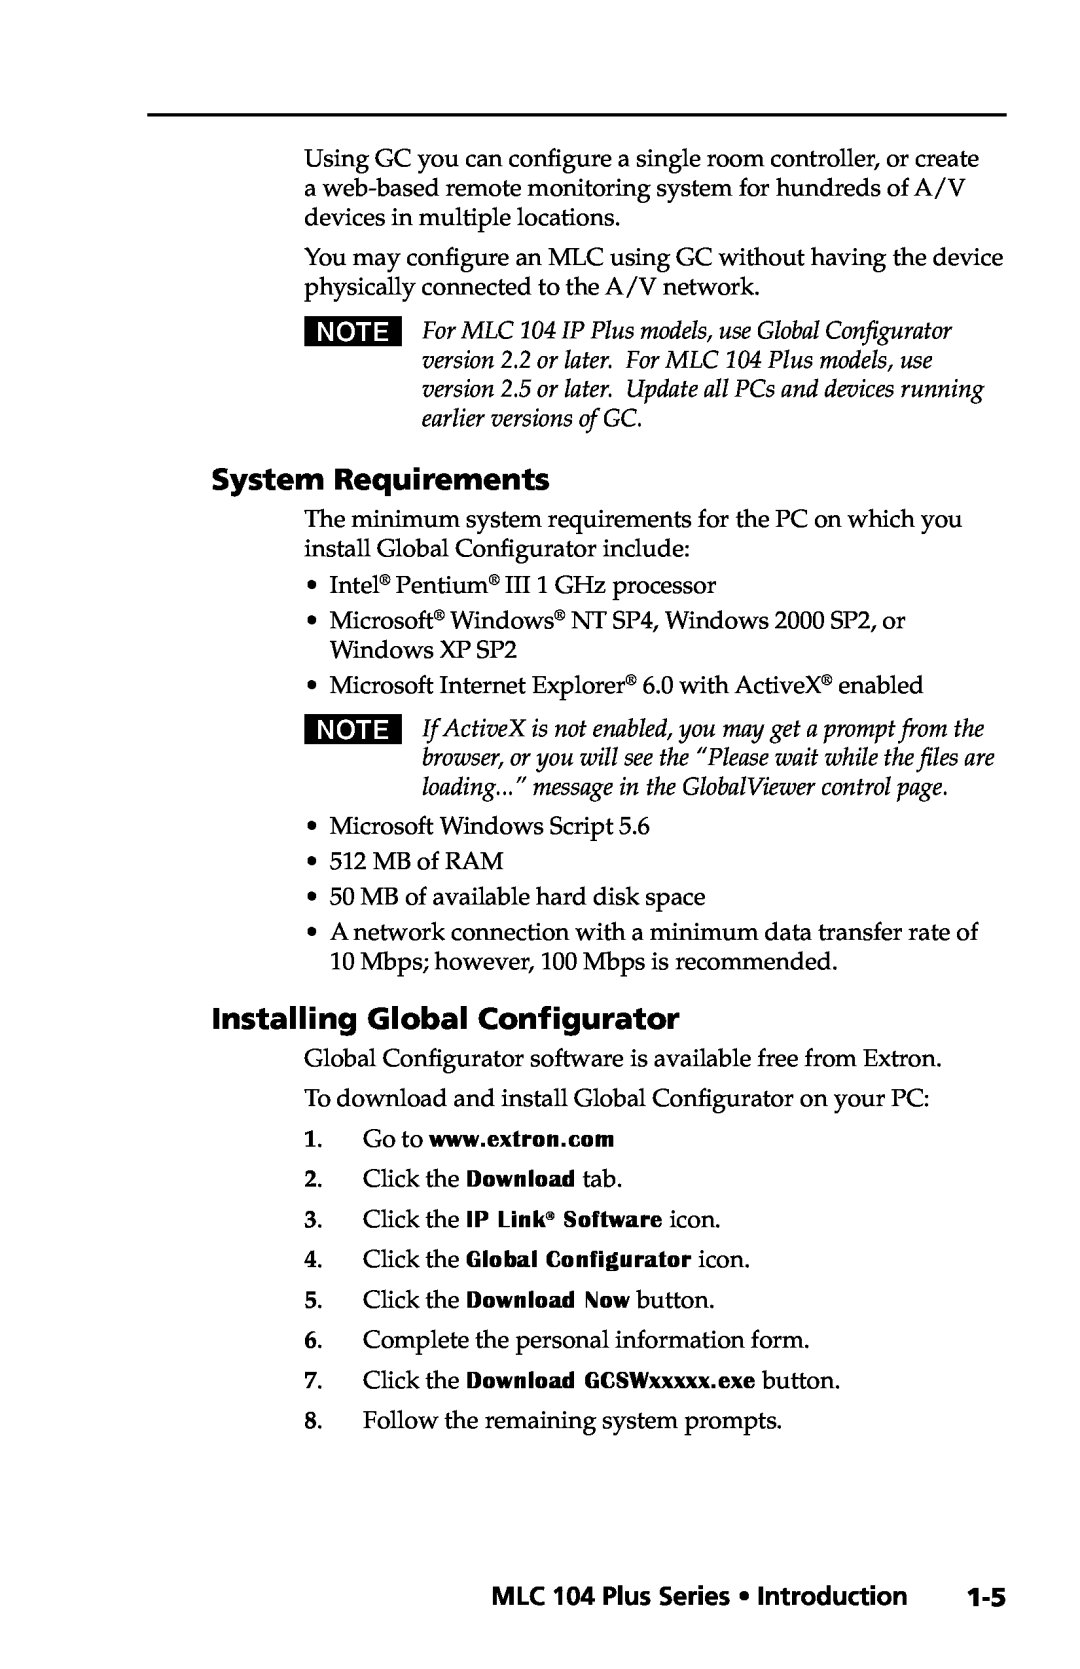 Extron electronic MLC 104 Plus Series setup guide System Requirements, Installing Global Configurator 